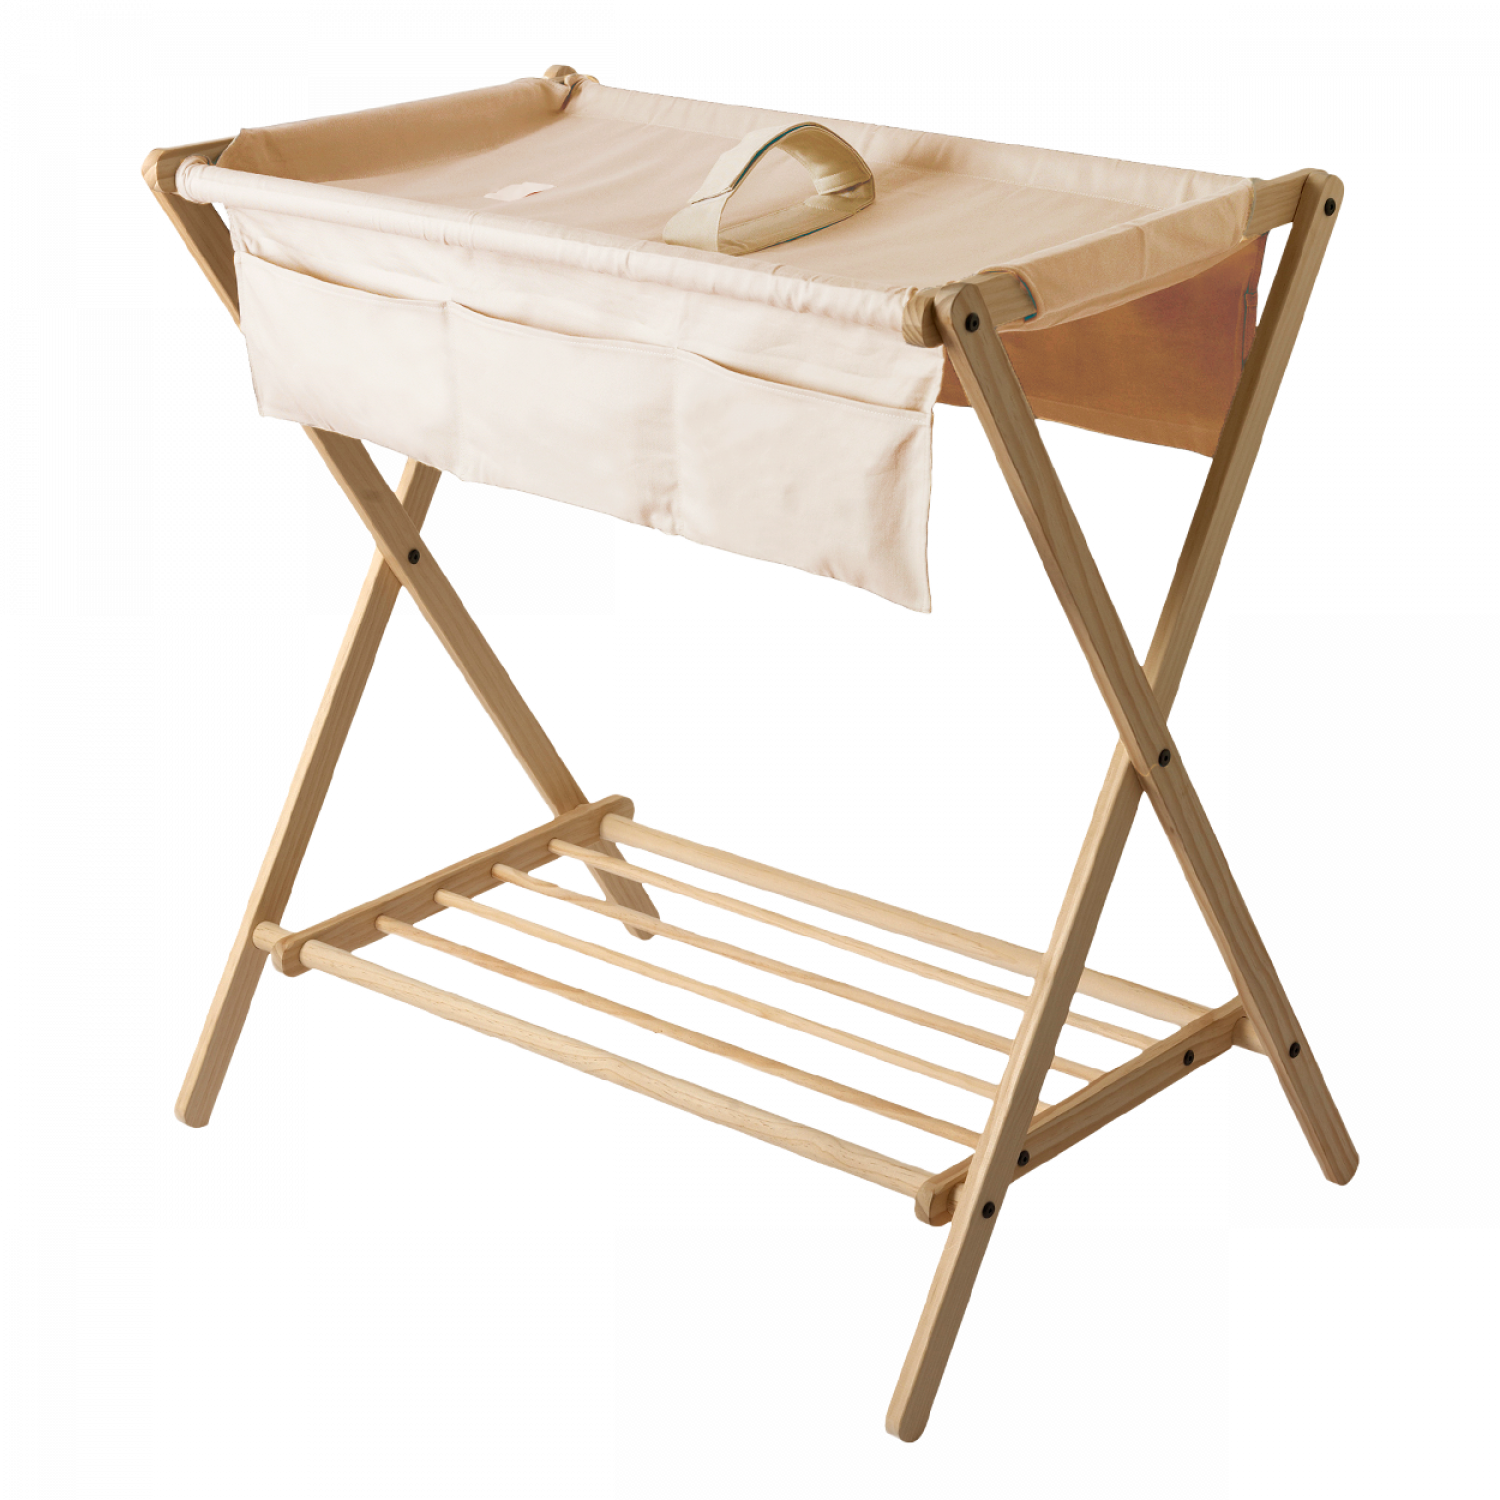 Changing Table Image HD Image Free PNG PNG Image